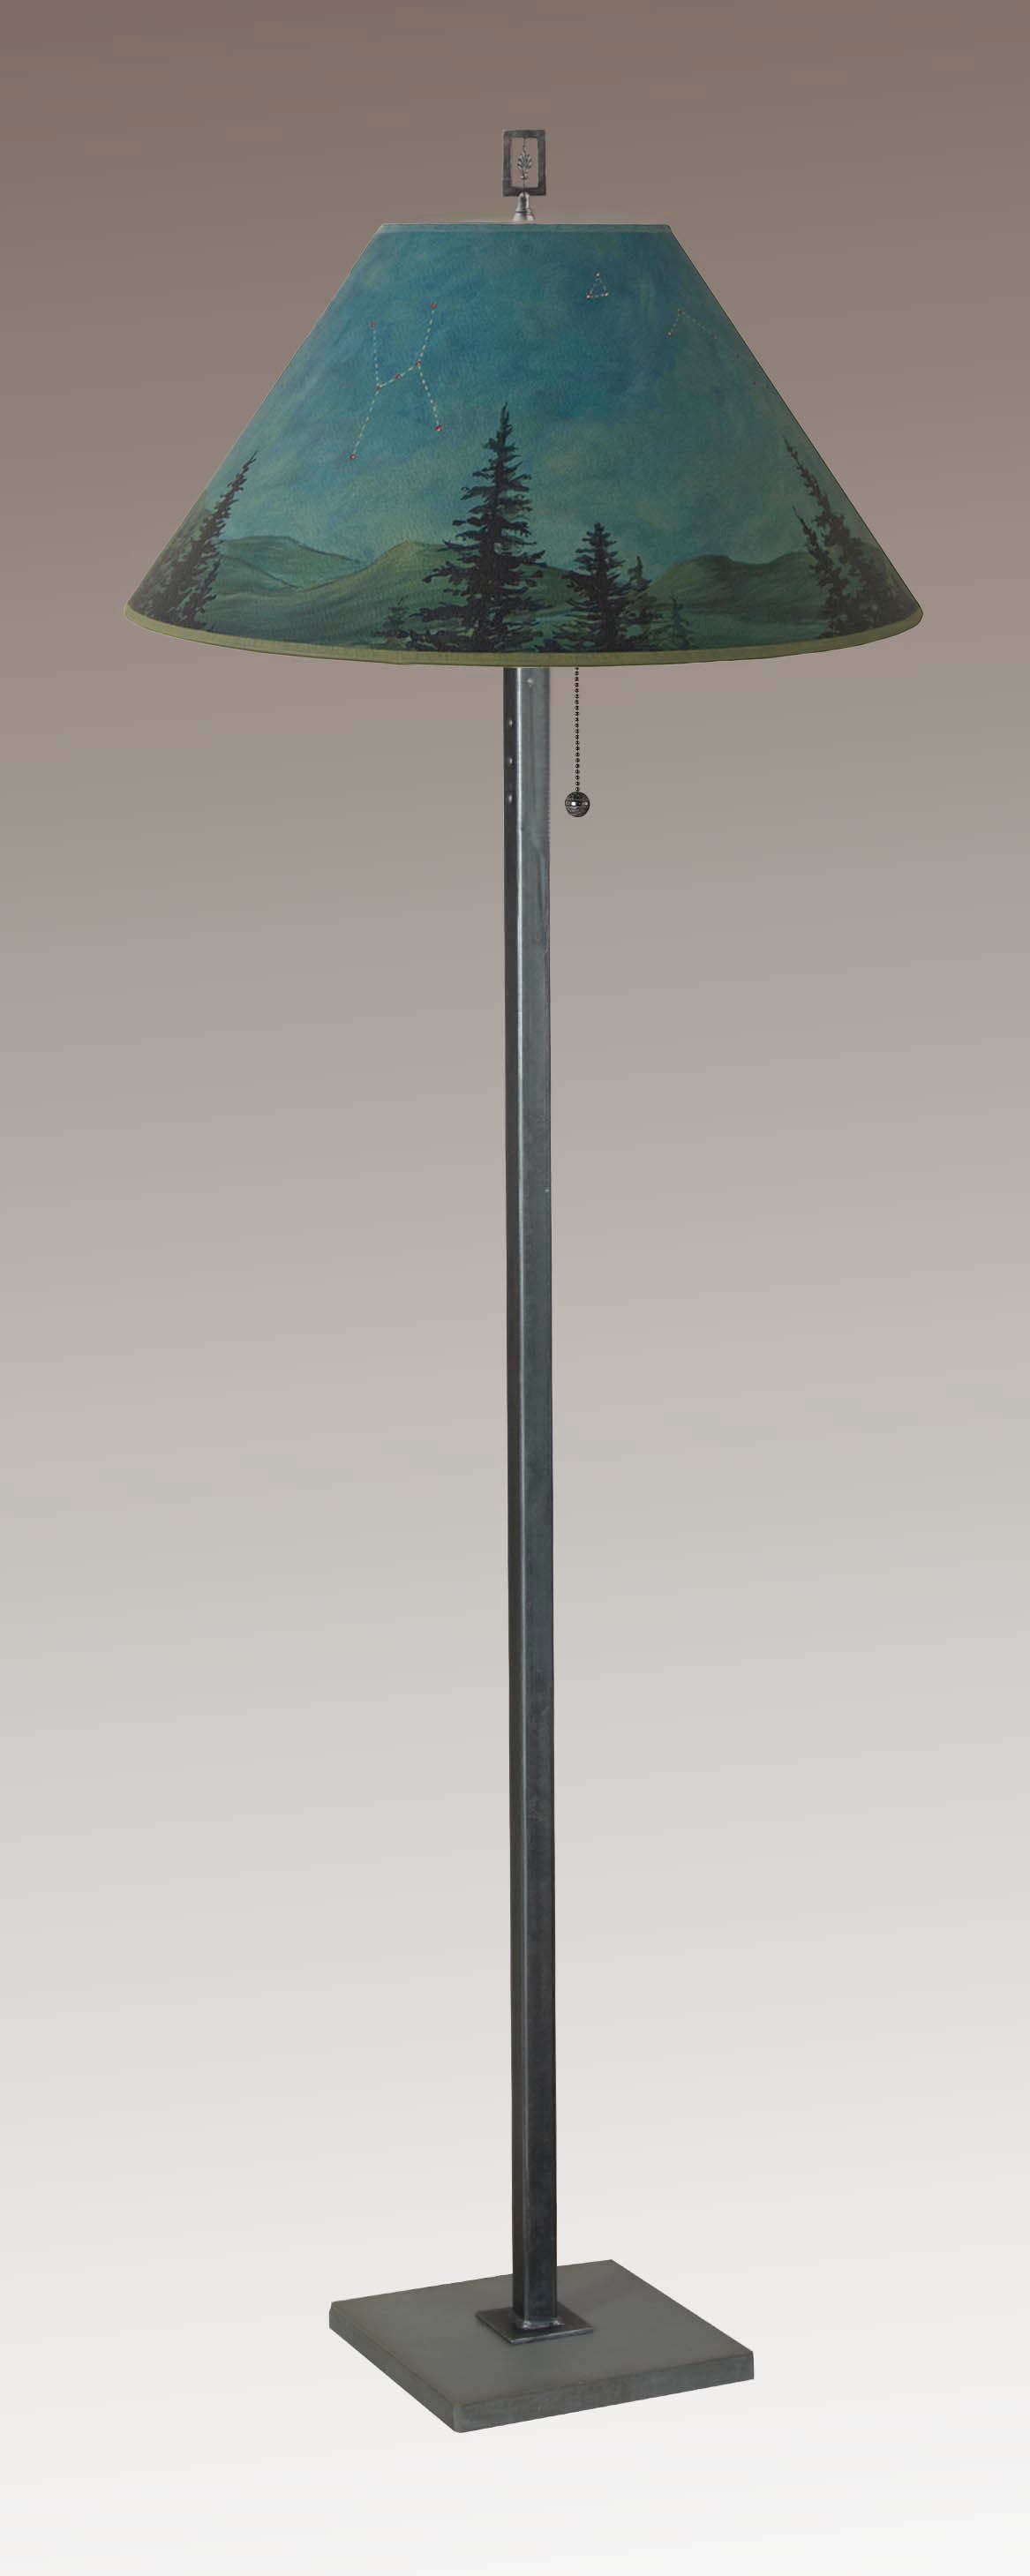 Steel Floor Lamp with Large Conical Shade in Midnight Sky